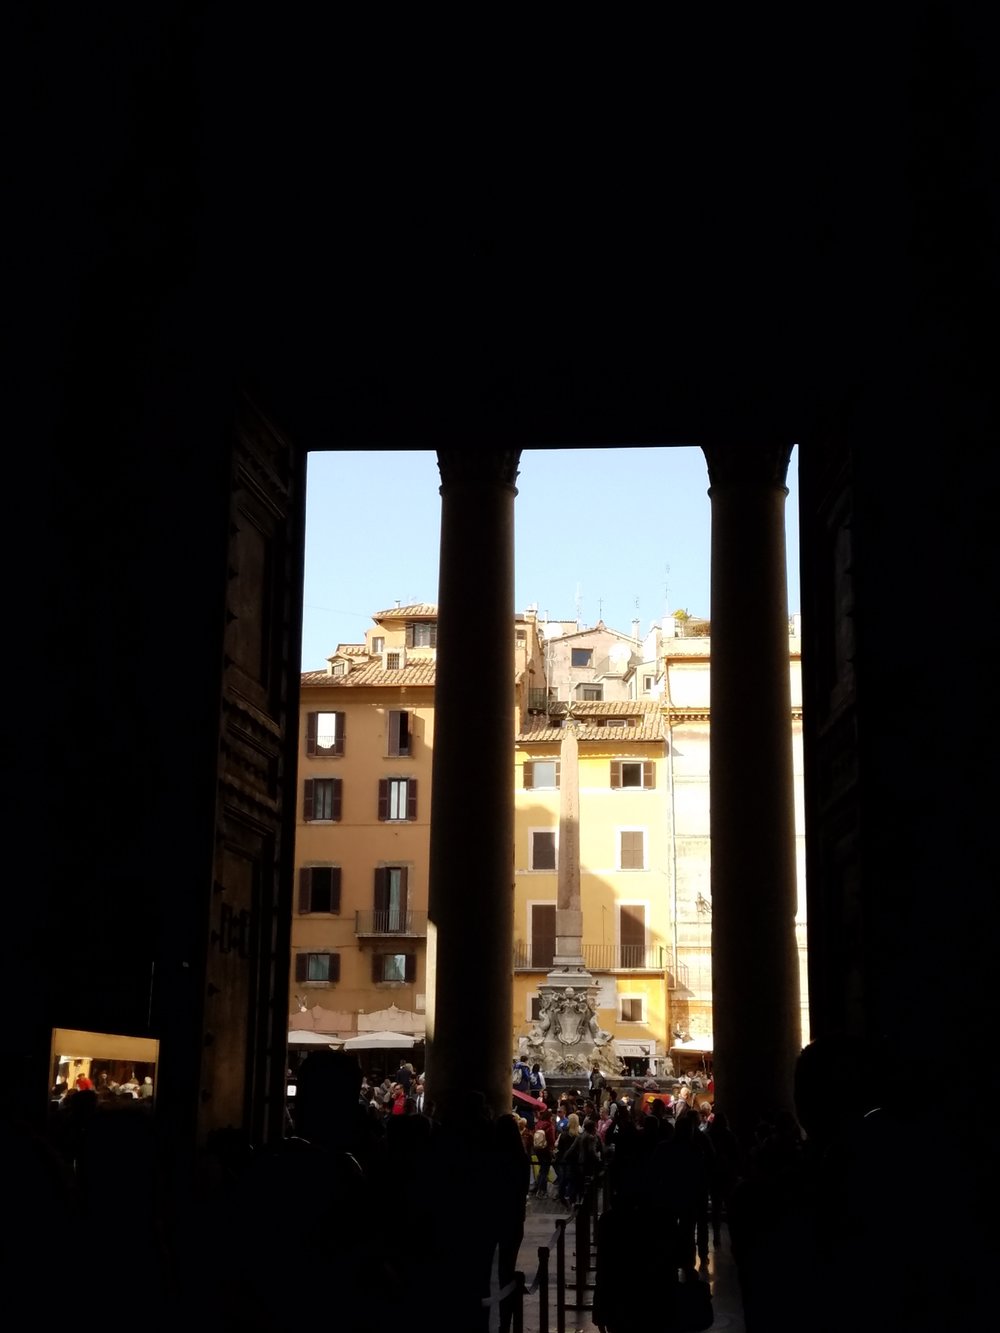 Looking out from The Pantheon